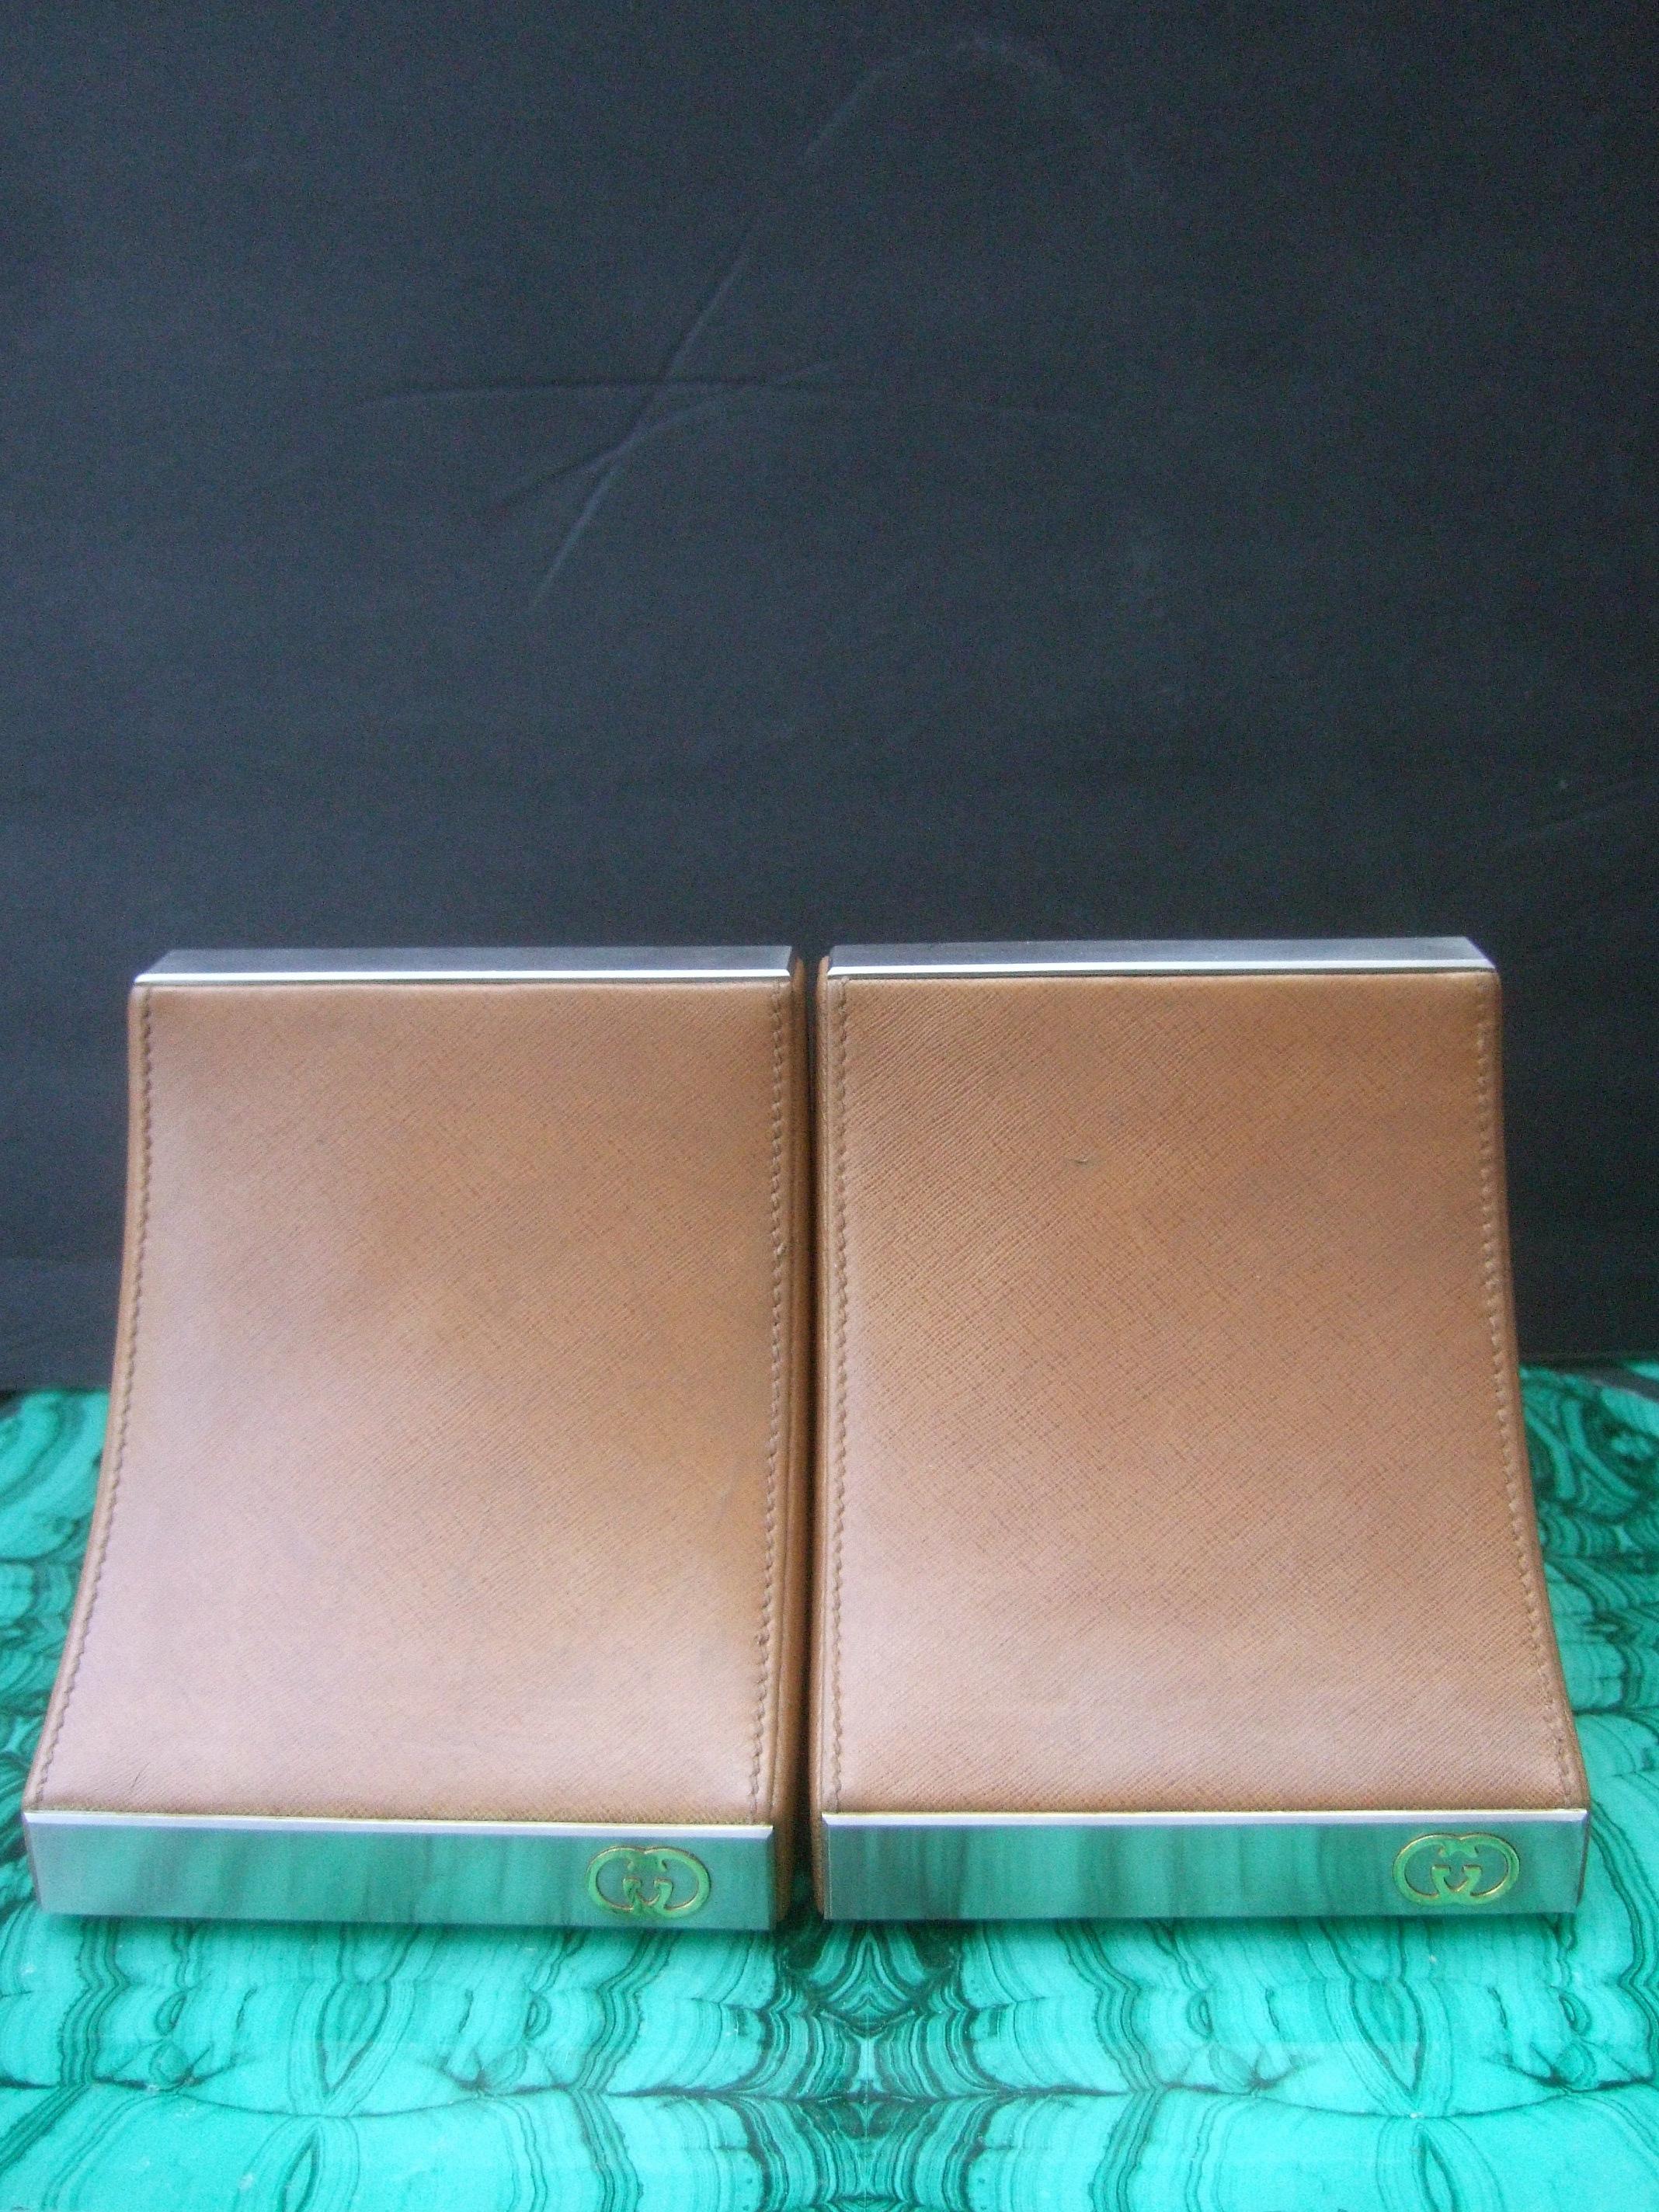 Gucci Italy Rare Caramel Brown Leather Pair of Bookends c 1970s  8